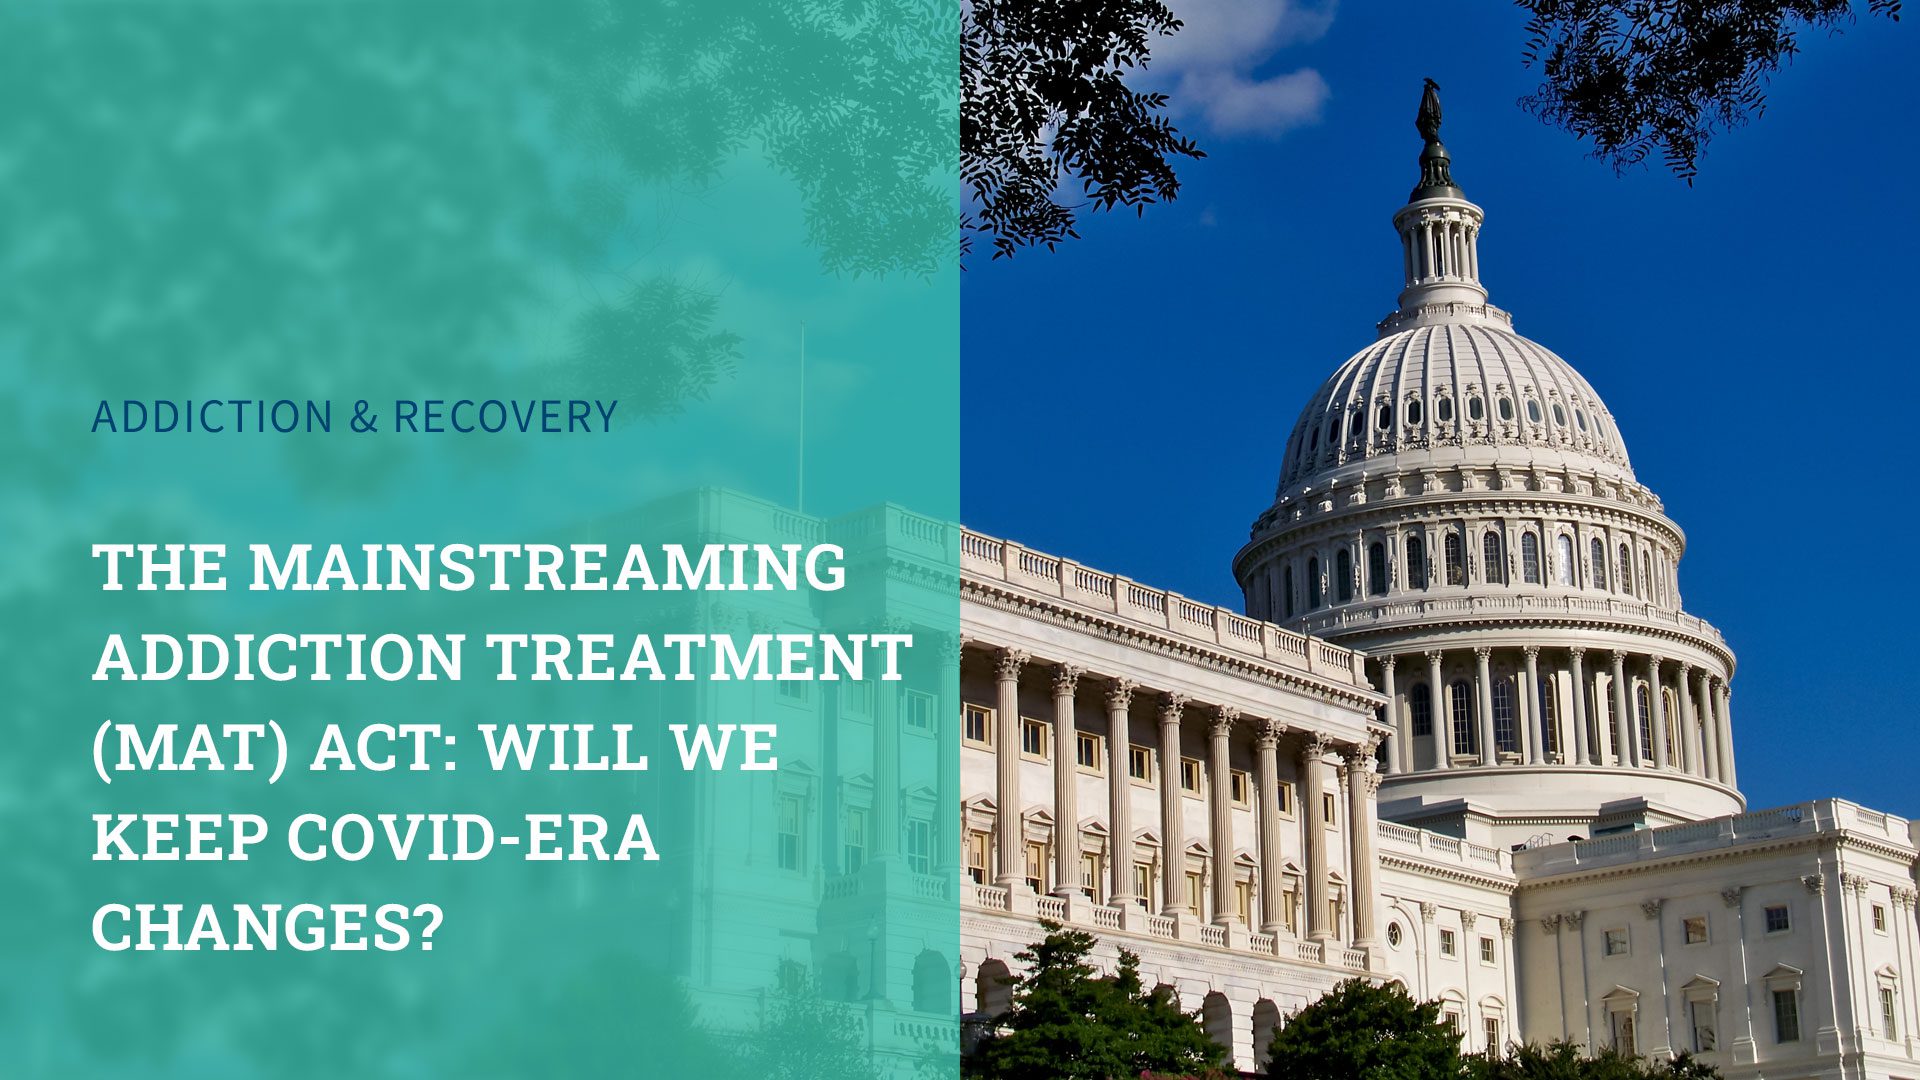 The Mainstreaming Addiction Treatment (MAT) Act: Will We Keep COVID-Era Changes?